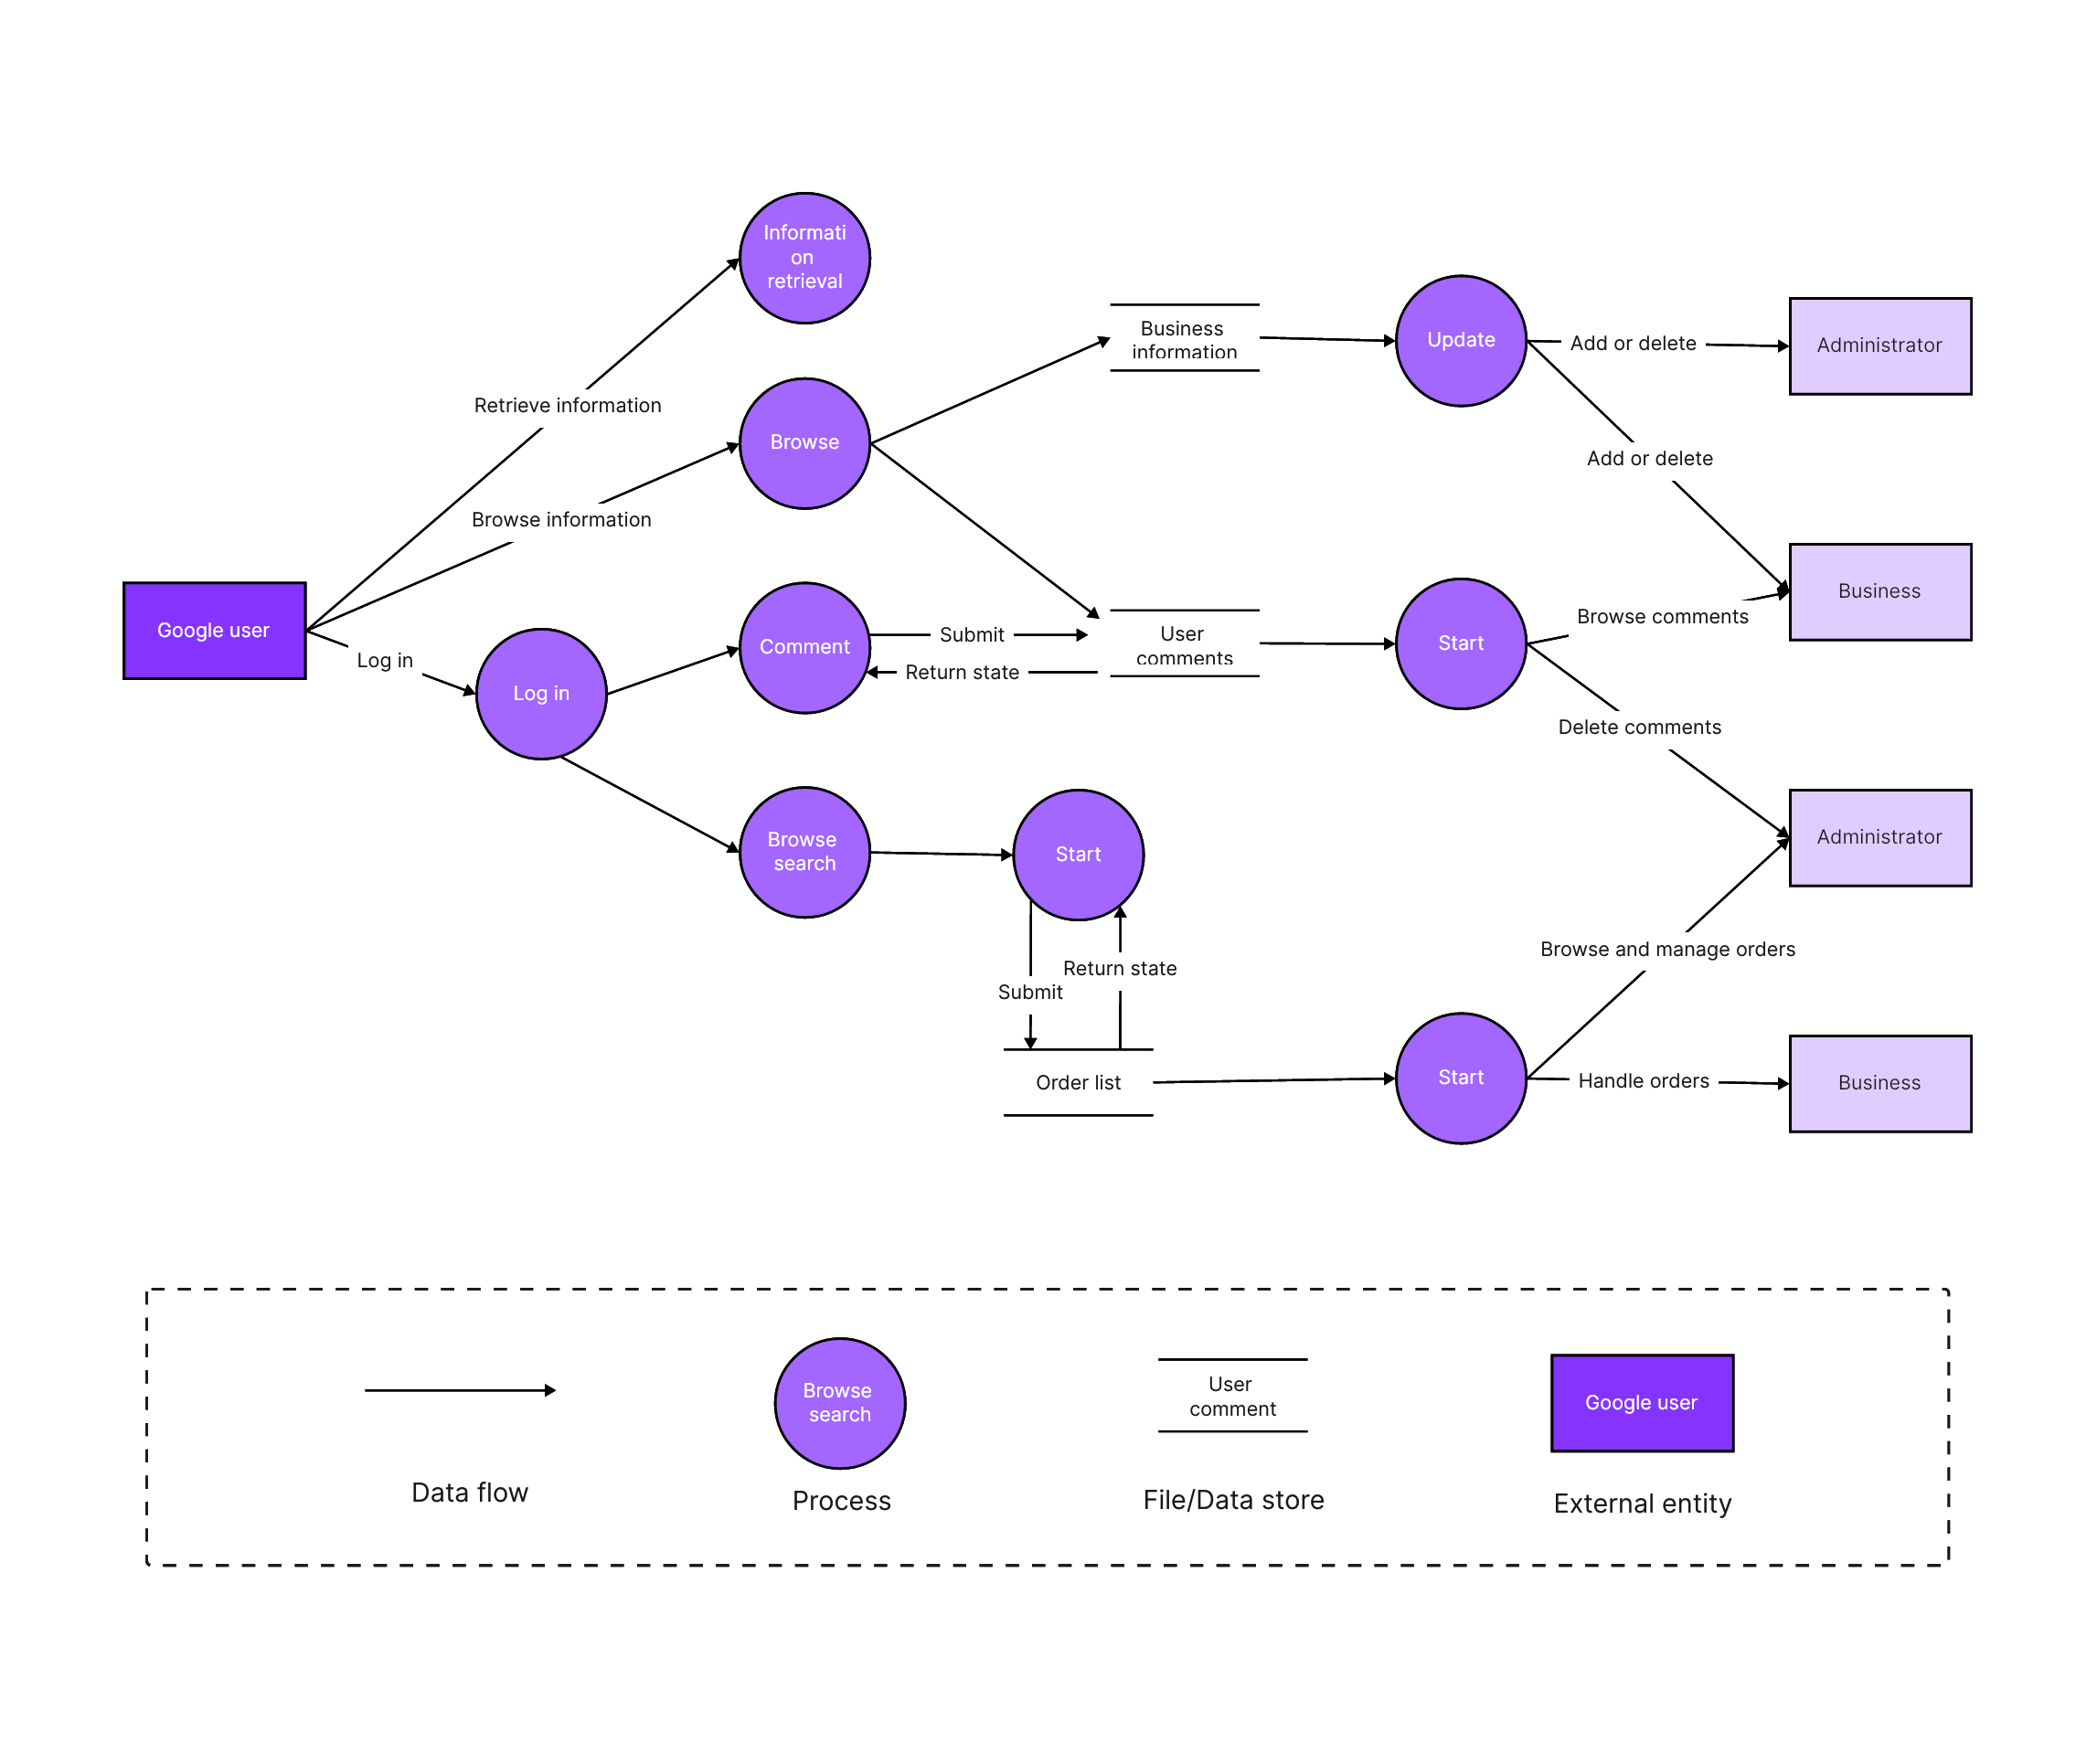 Demystifying Data Flow Diagrams for Online Shopping Systems